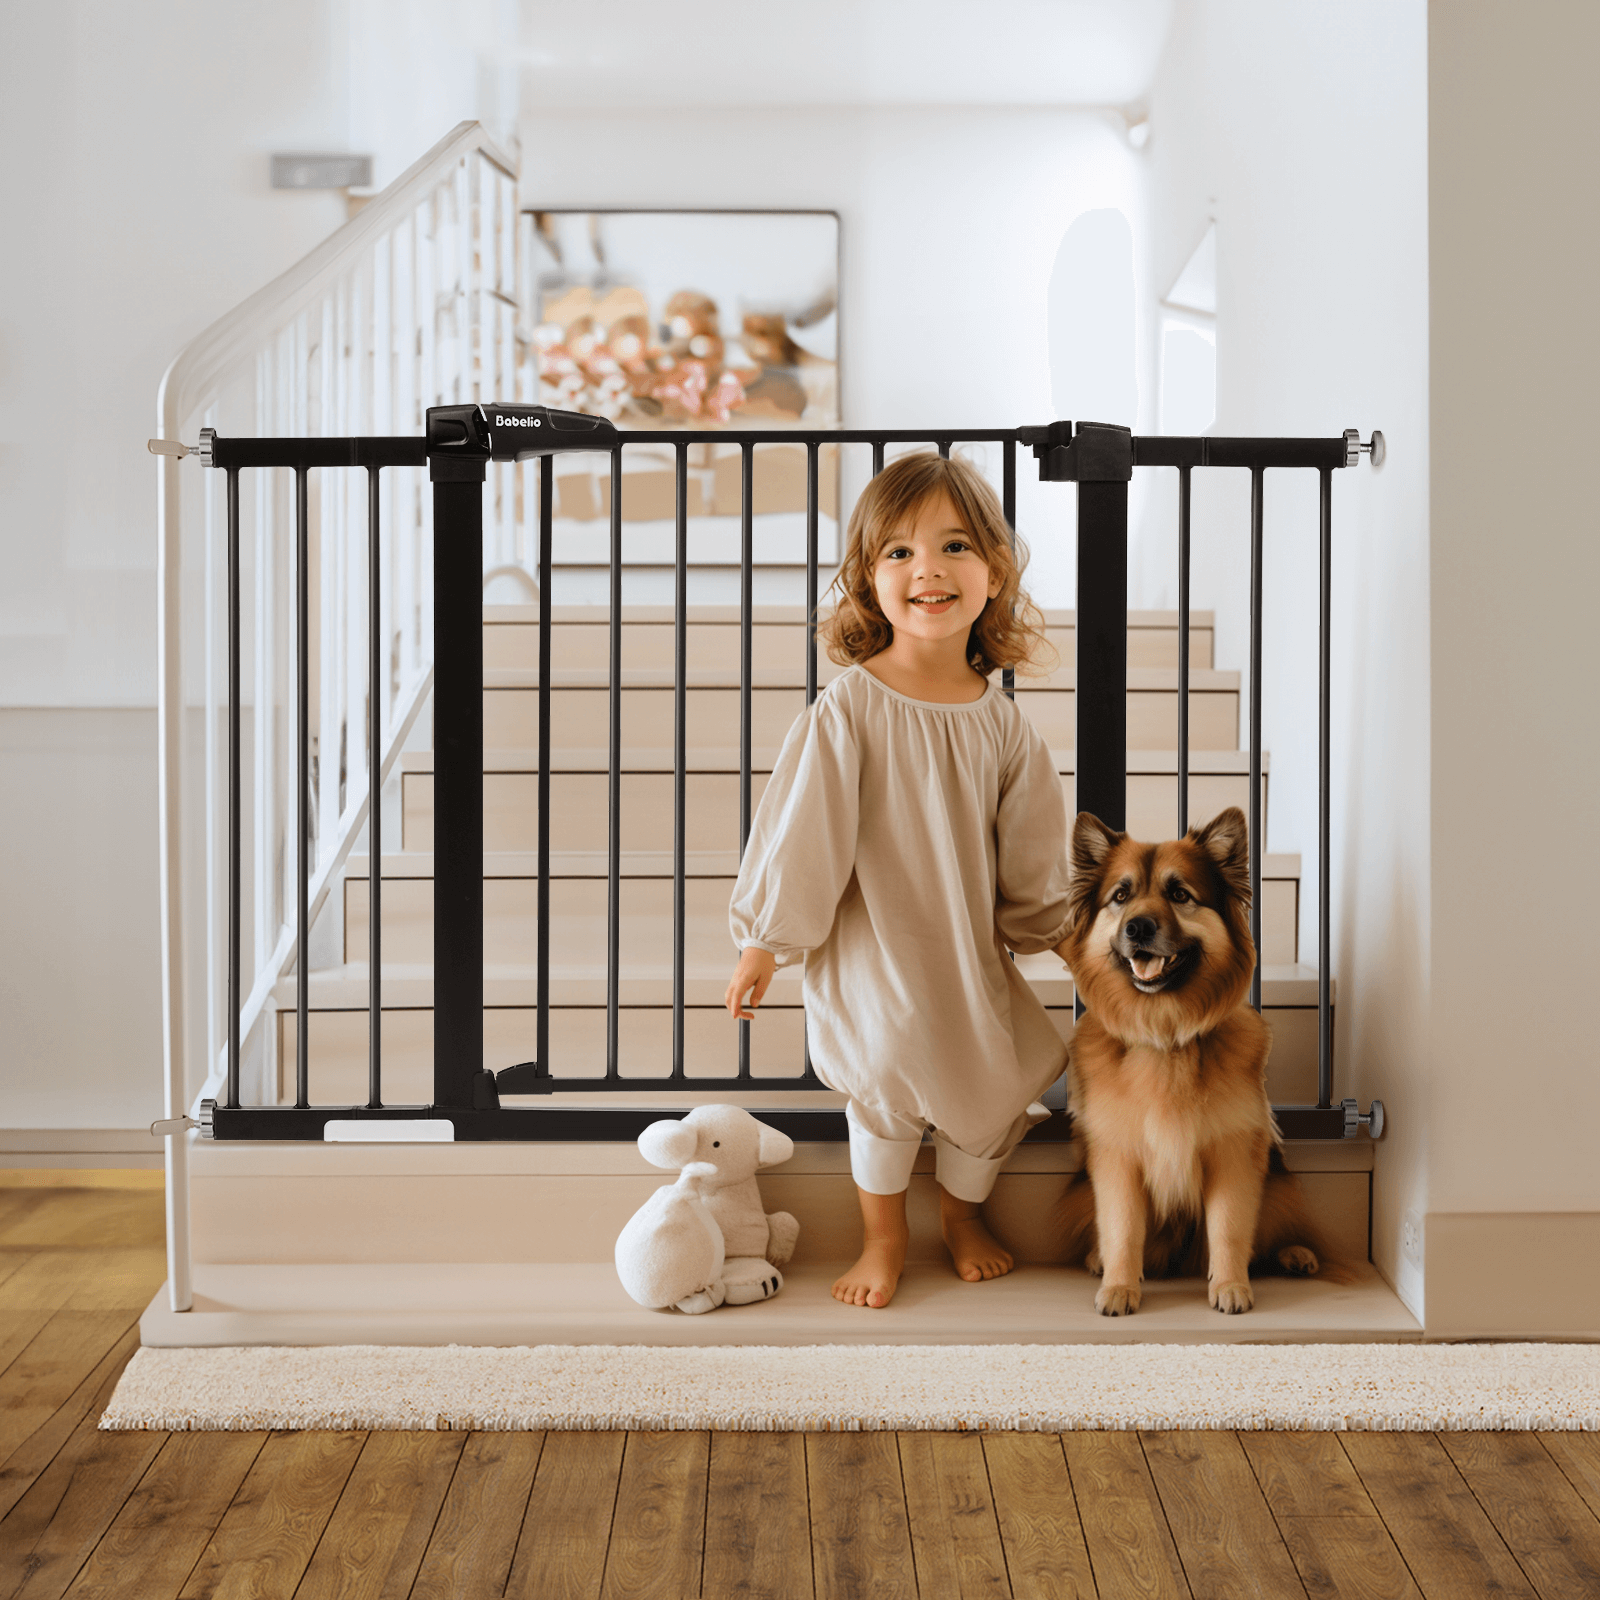 Babelio 29-48" Wide All-Steel Baby Gate – Easy Walk-Through, No-Drill Setup, Auto-Close, for Children and Pets